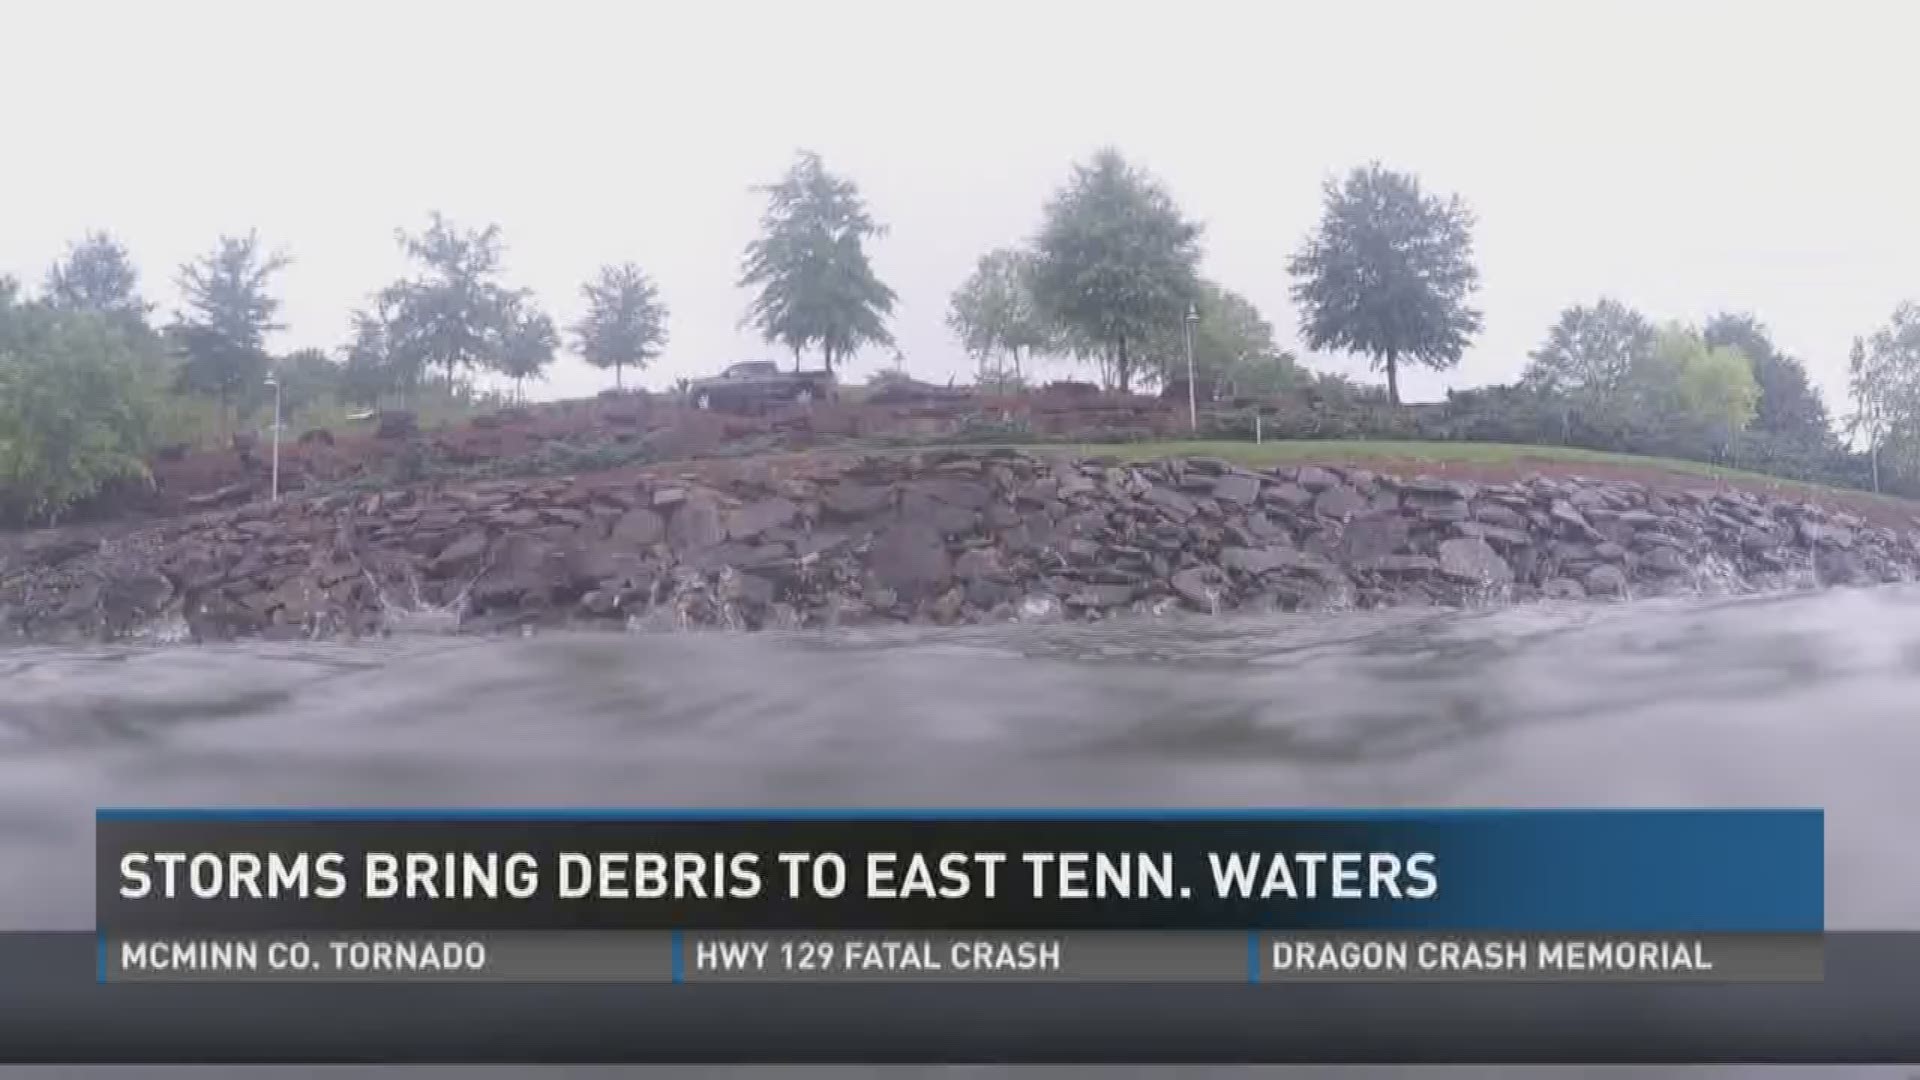 Debris causes damage to boats out on Fort Loudoun Lake.